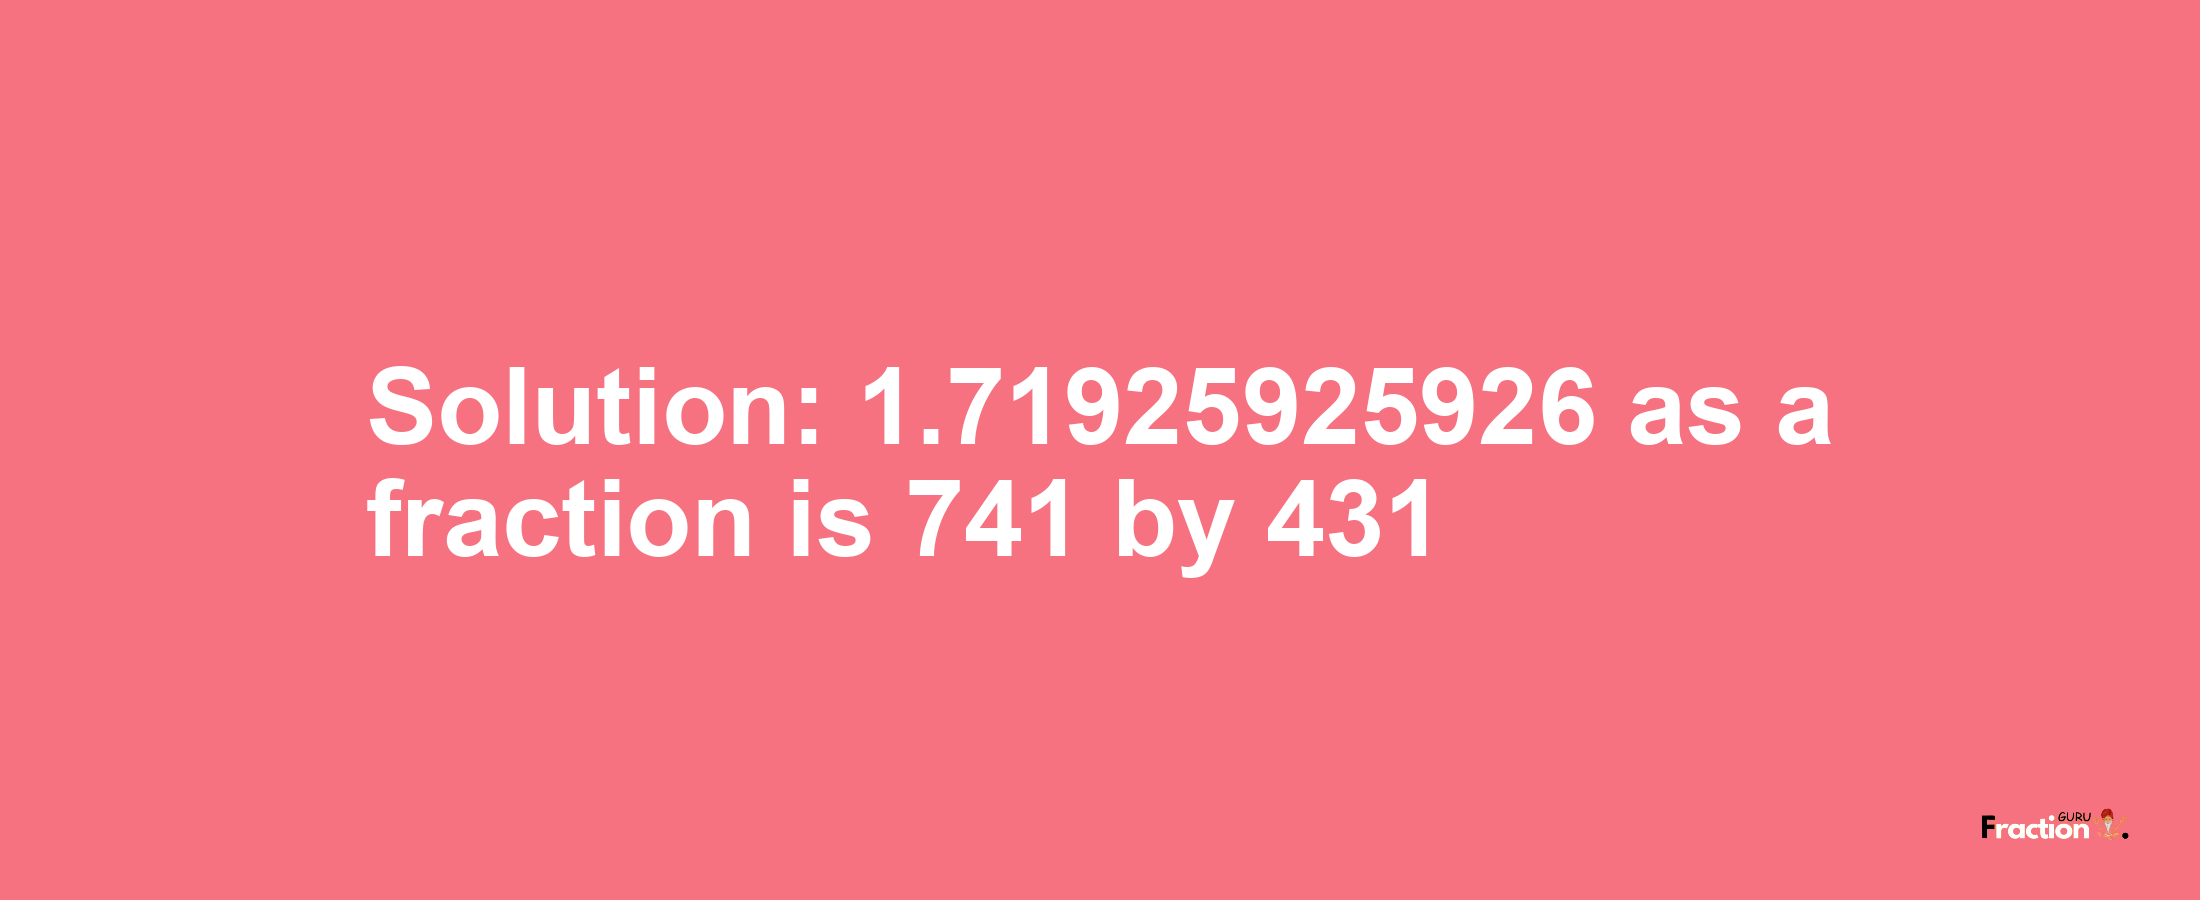 Solution:1.71925925926 as a fraction is 741/431